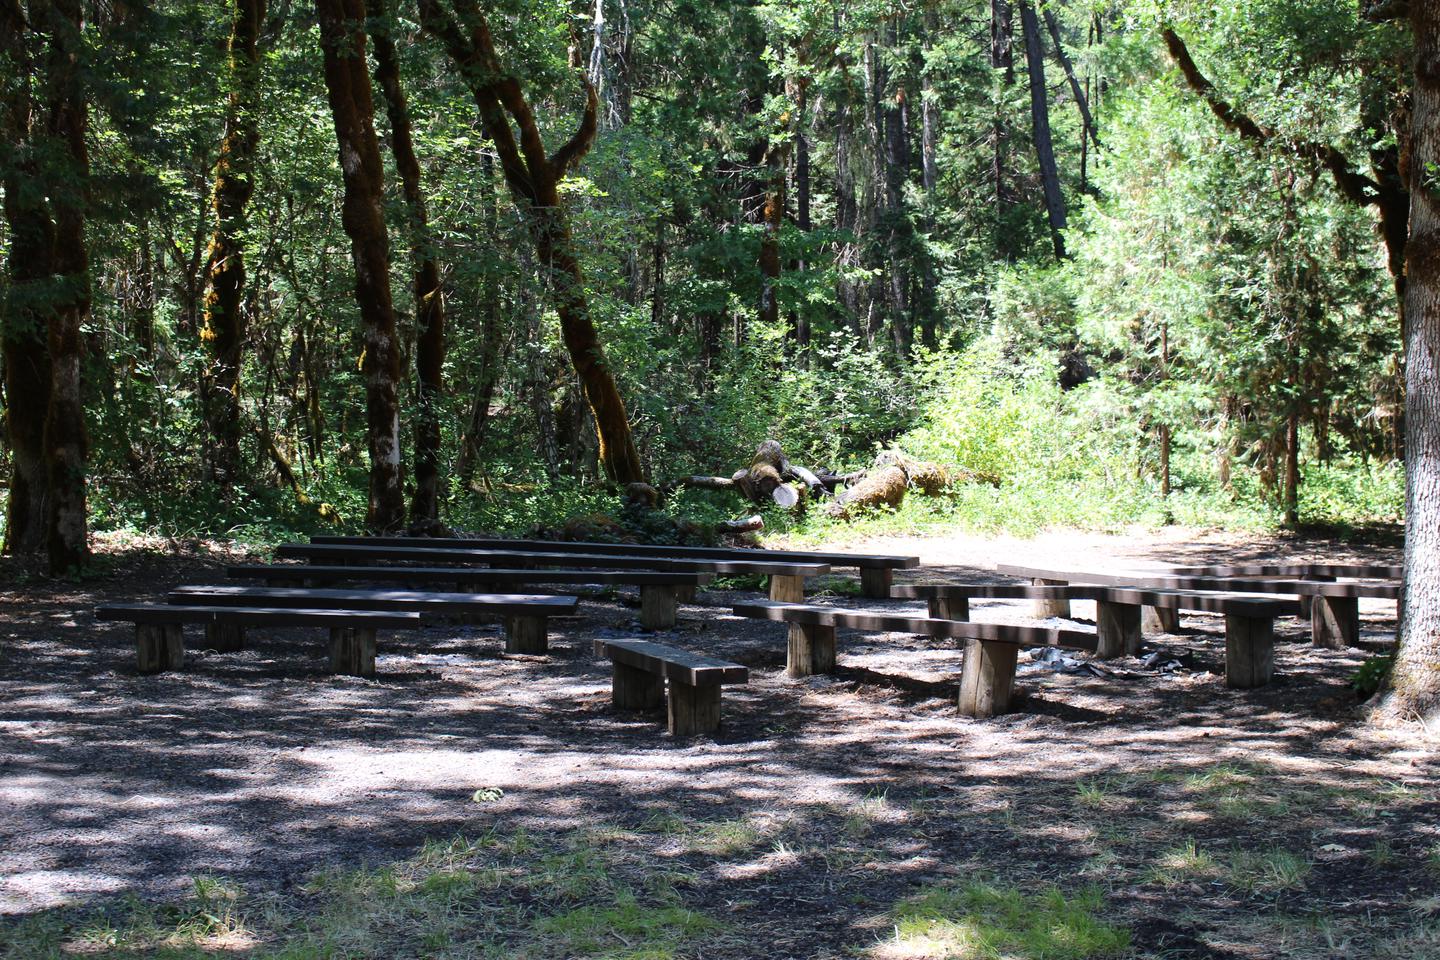 Small ampitheater for holding concerts, shows, or plays Packard Creek group site ampitheater